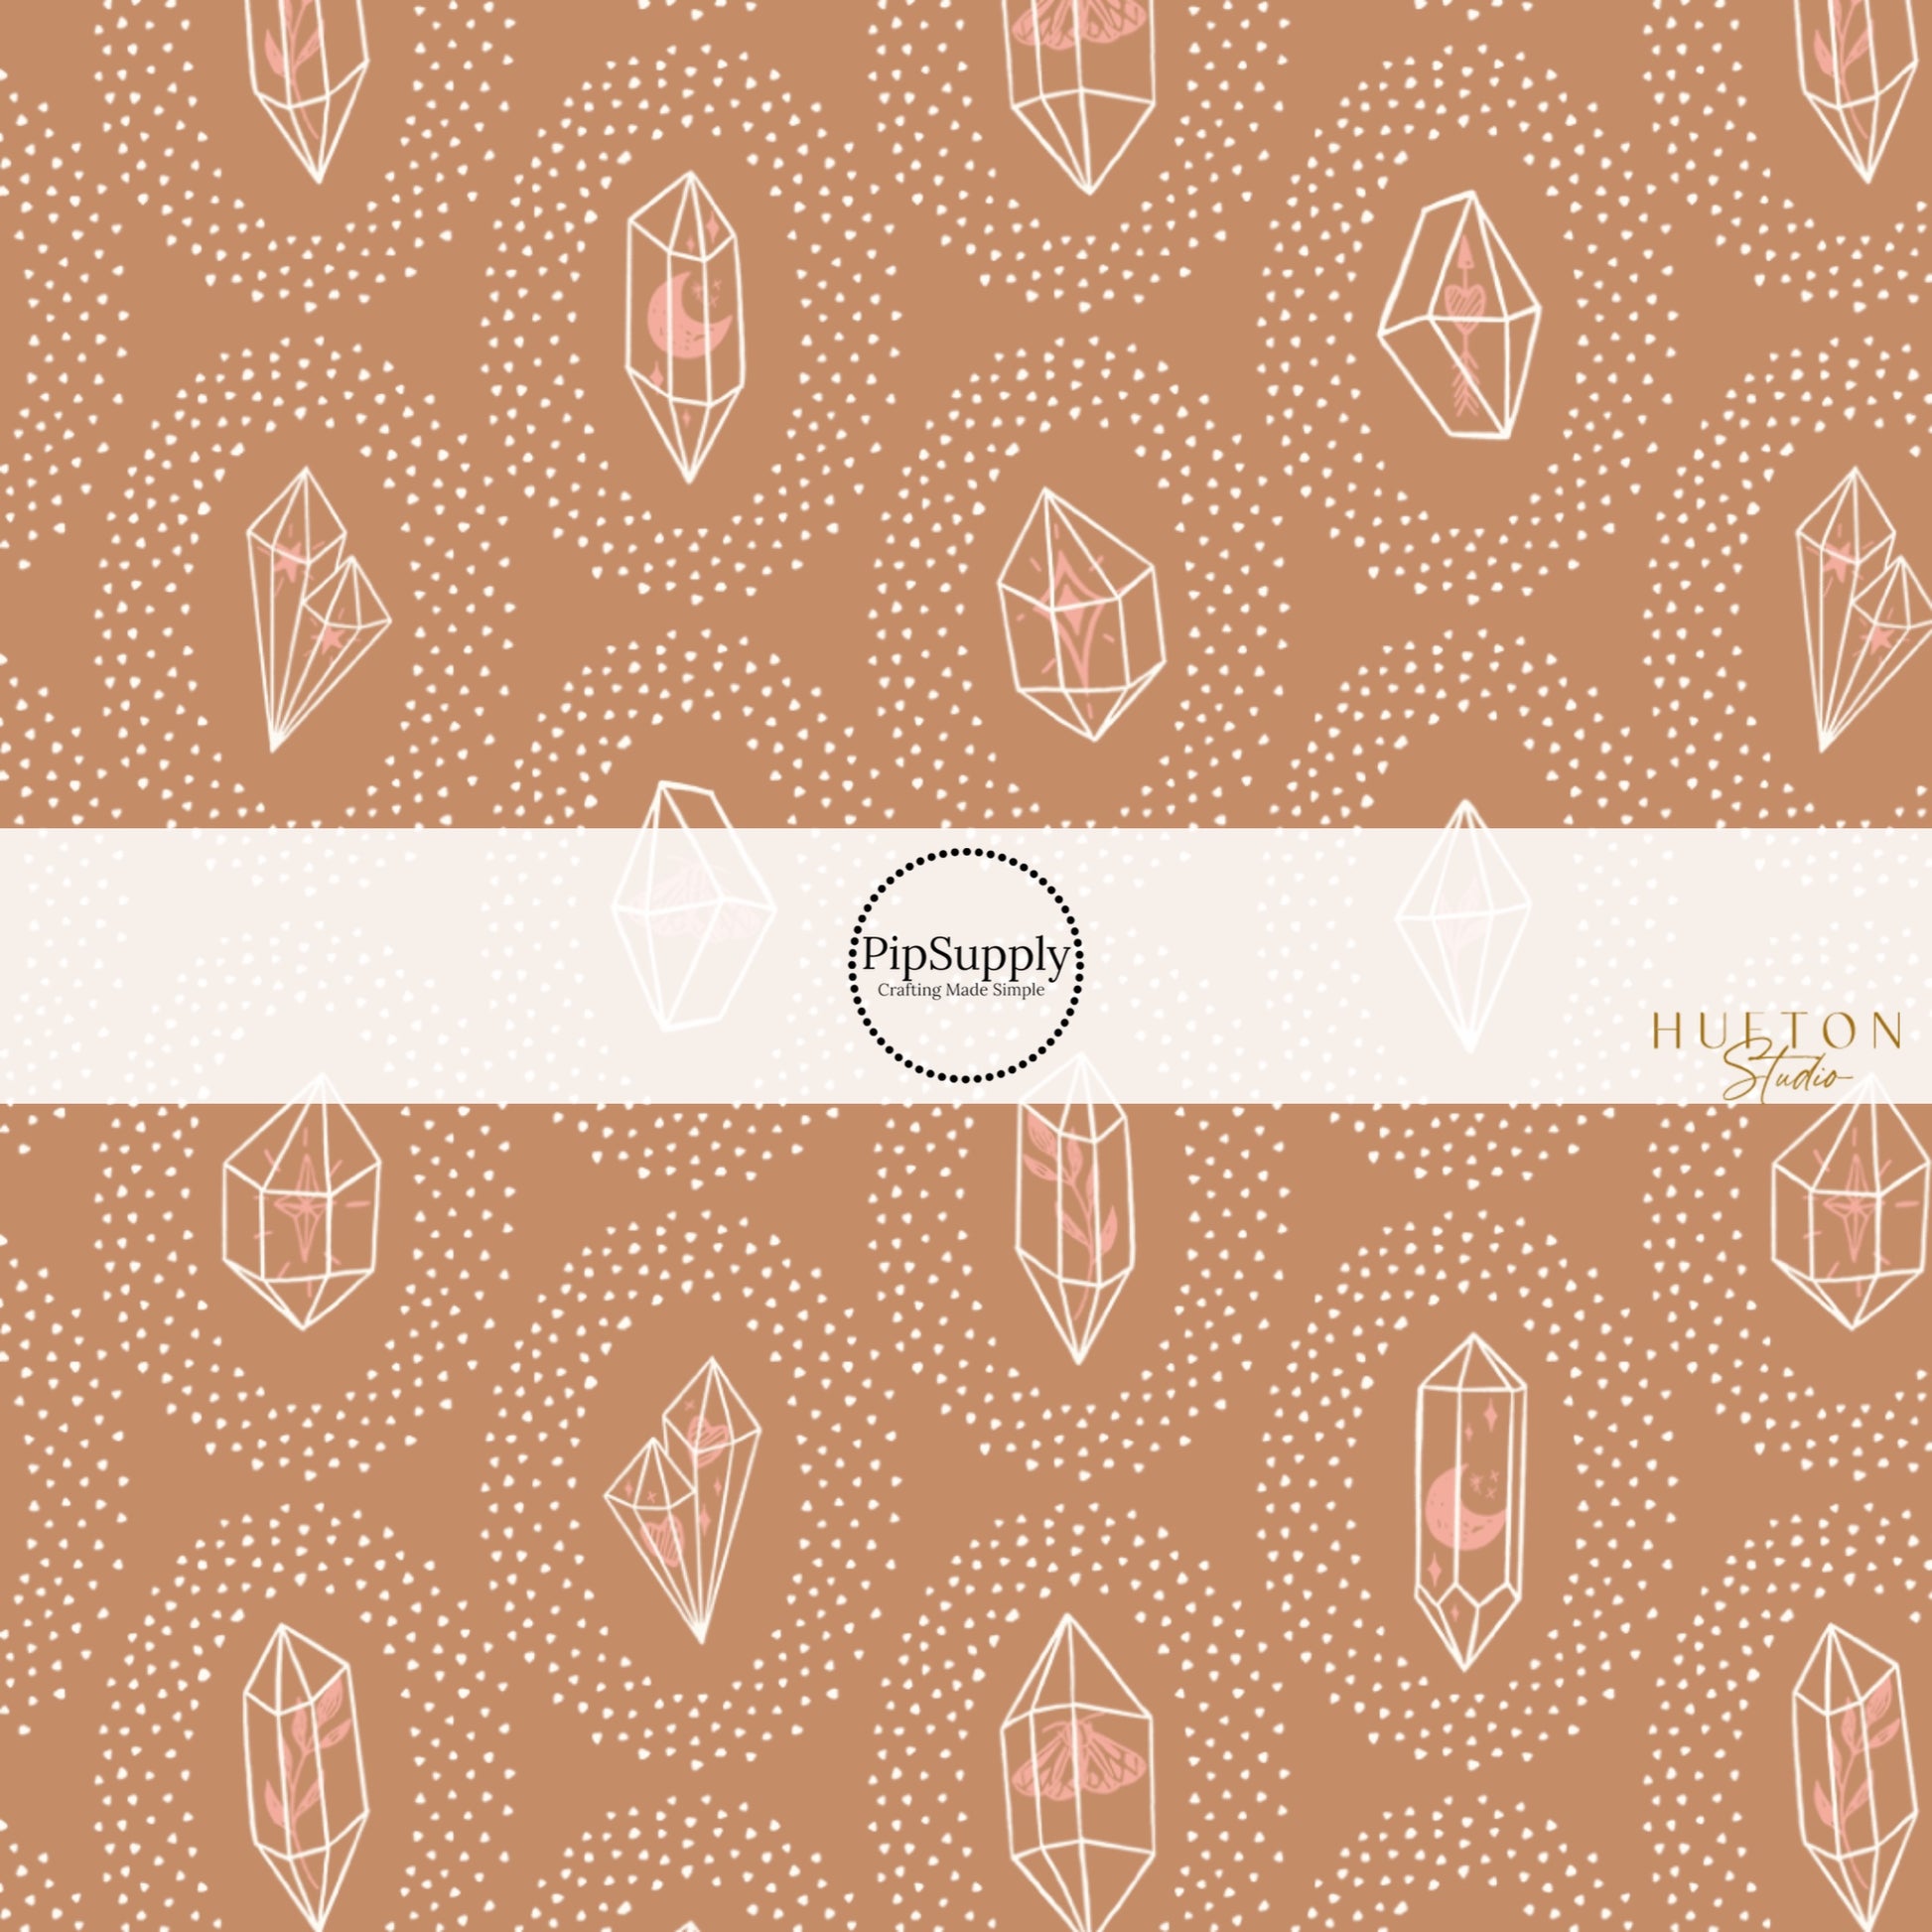 These crystal dot themed brown fabric by the yard features small white dots surrounding crystals on brown. This fun themed fabric can be used for all your sewing and crafting needs! 